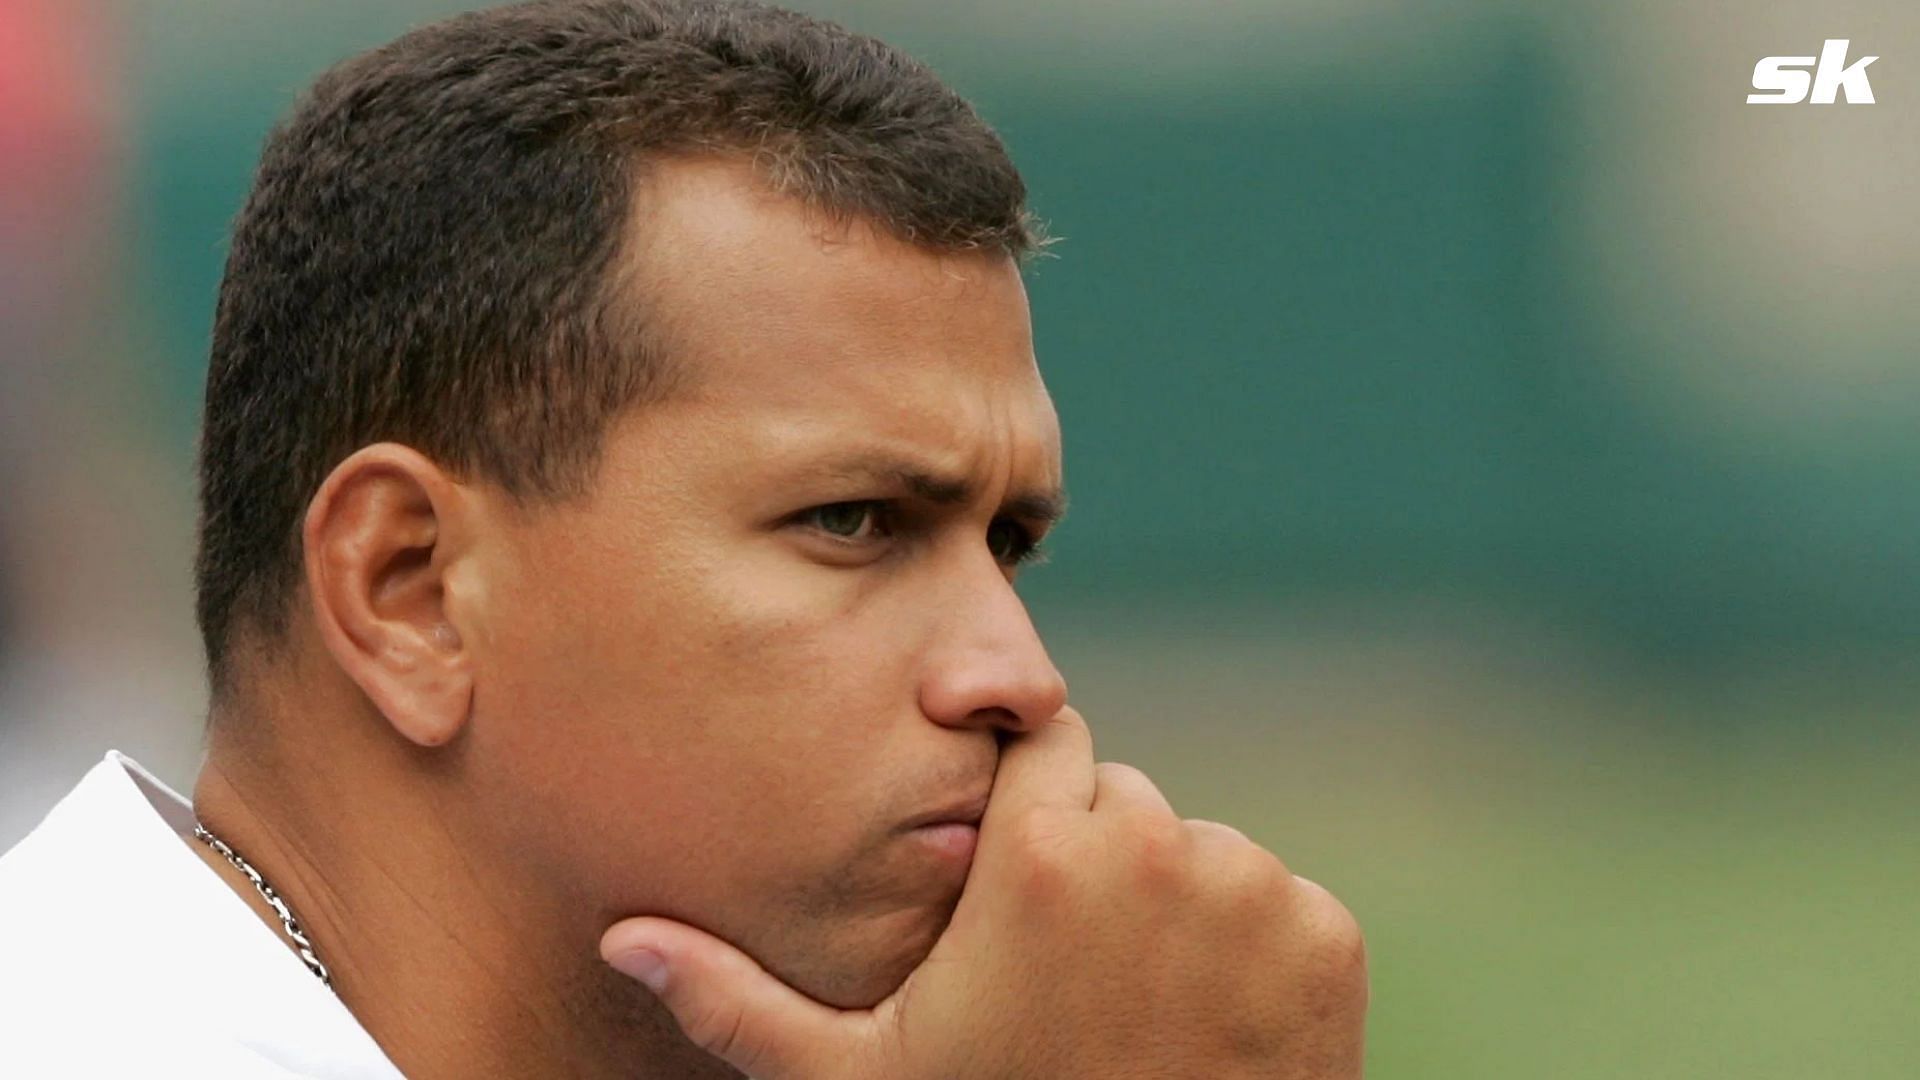  Alex Rodriguez once revealed that he did not know which PEDs he had used in an interview